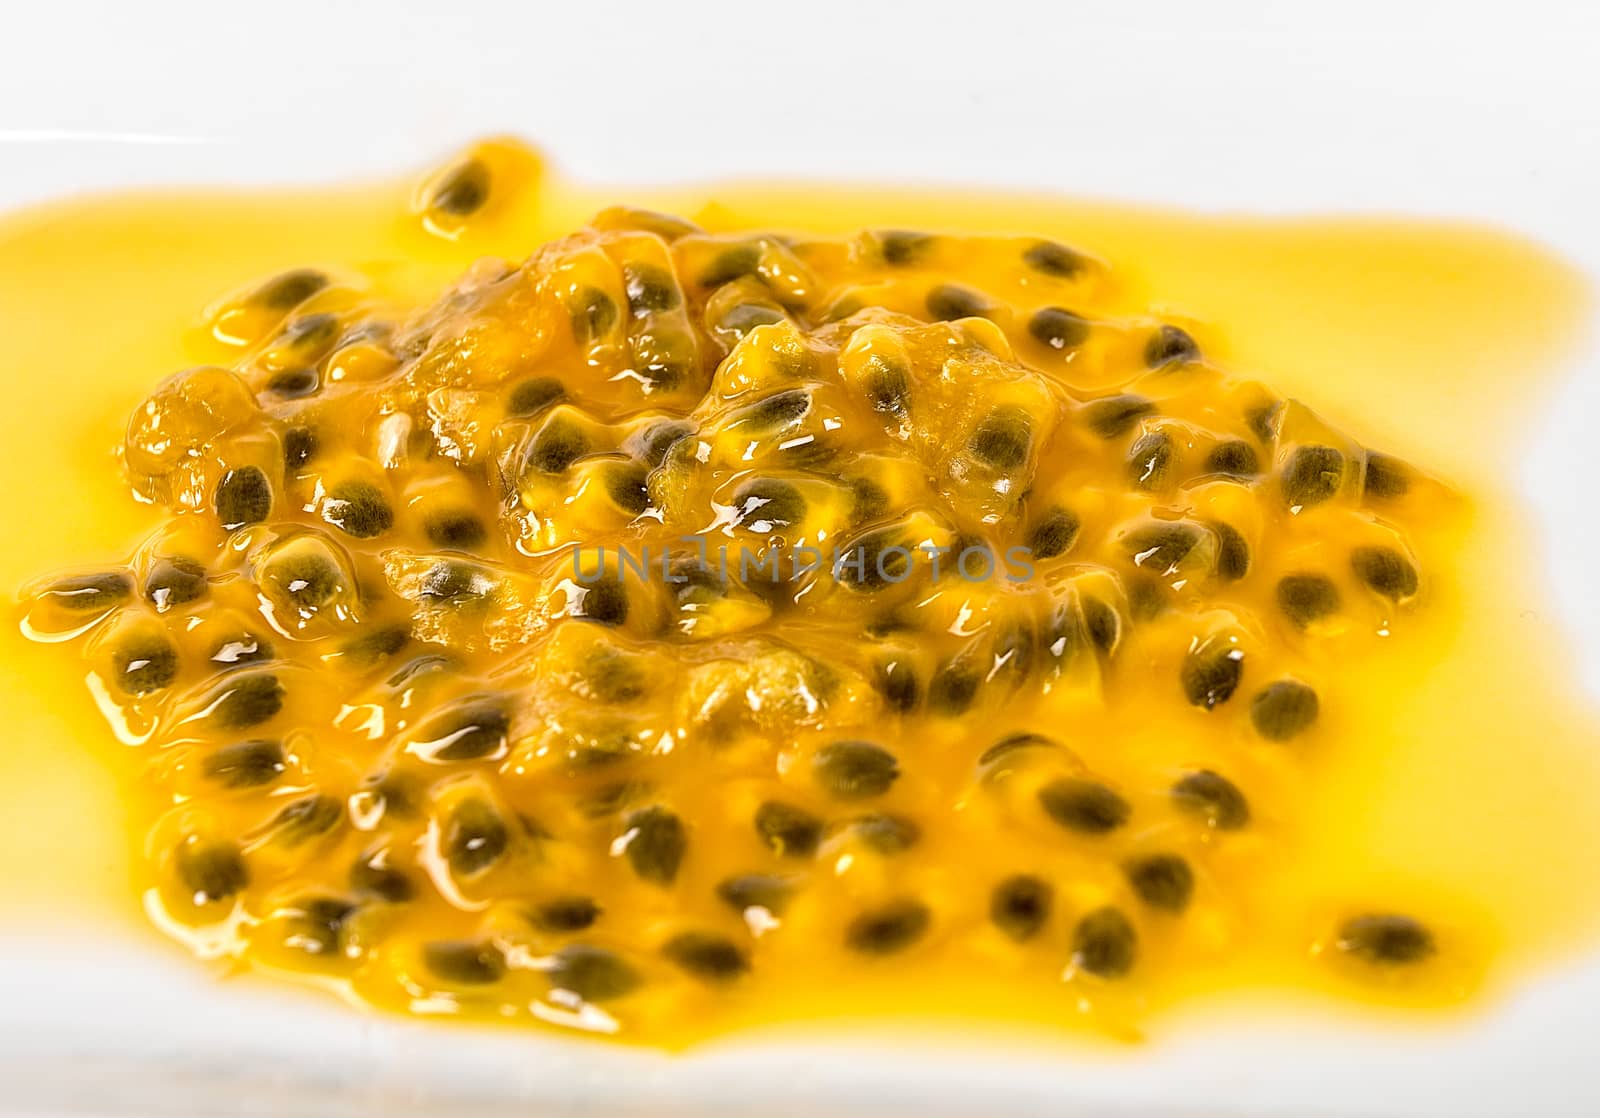 Passion fruit by jrivalta